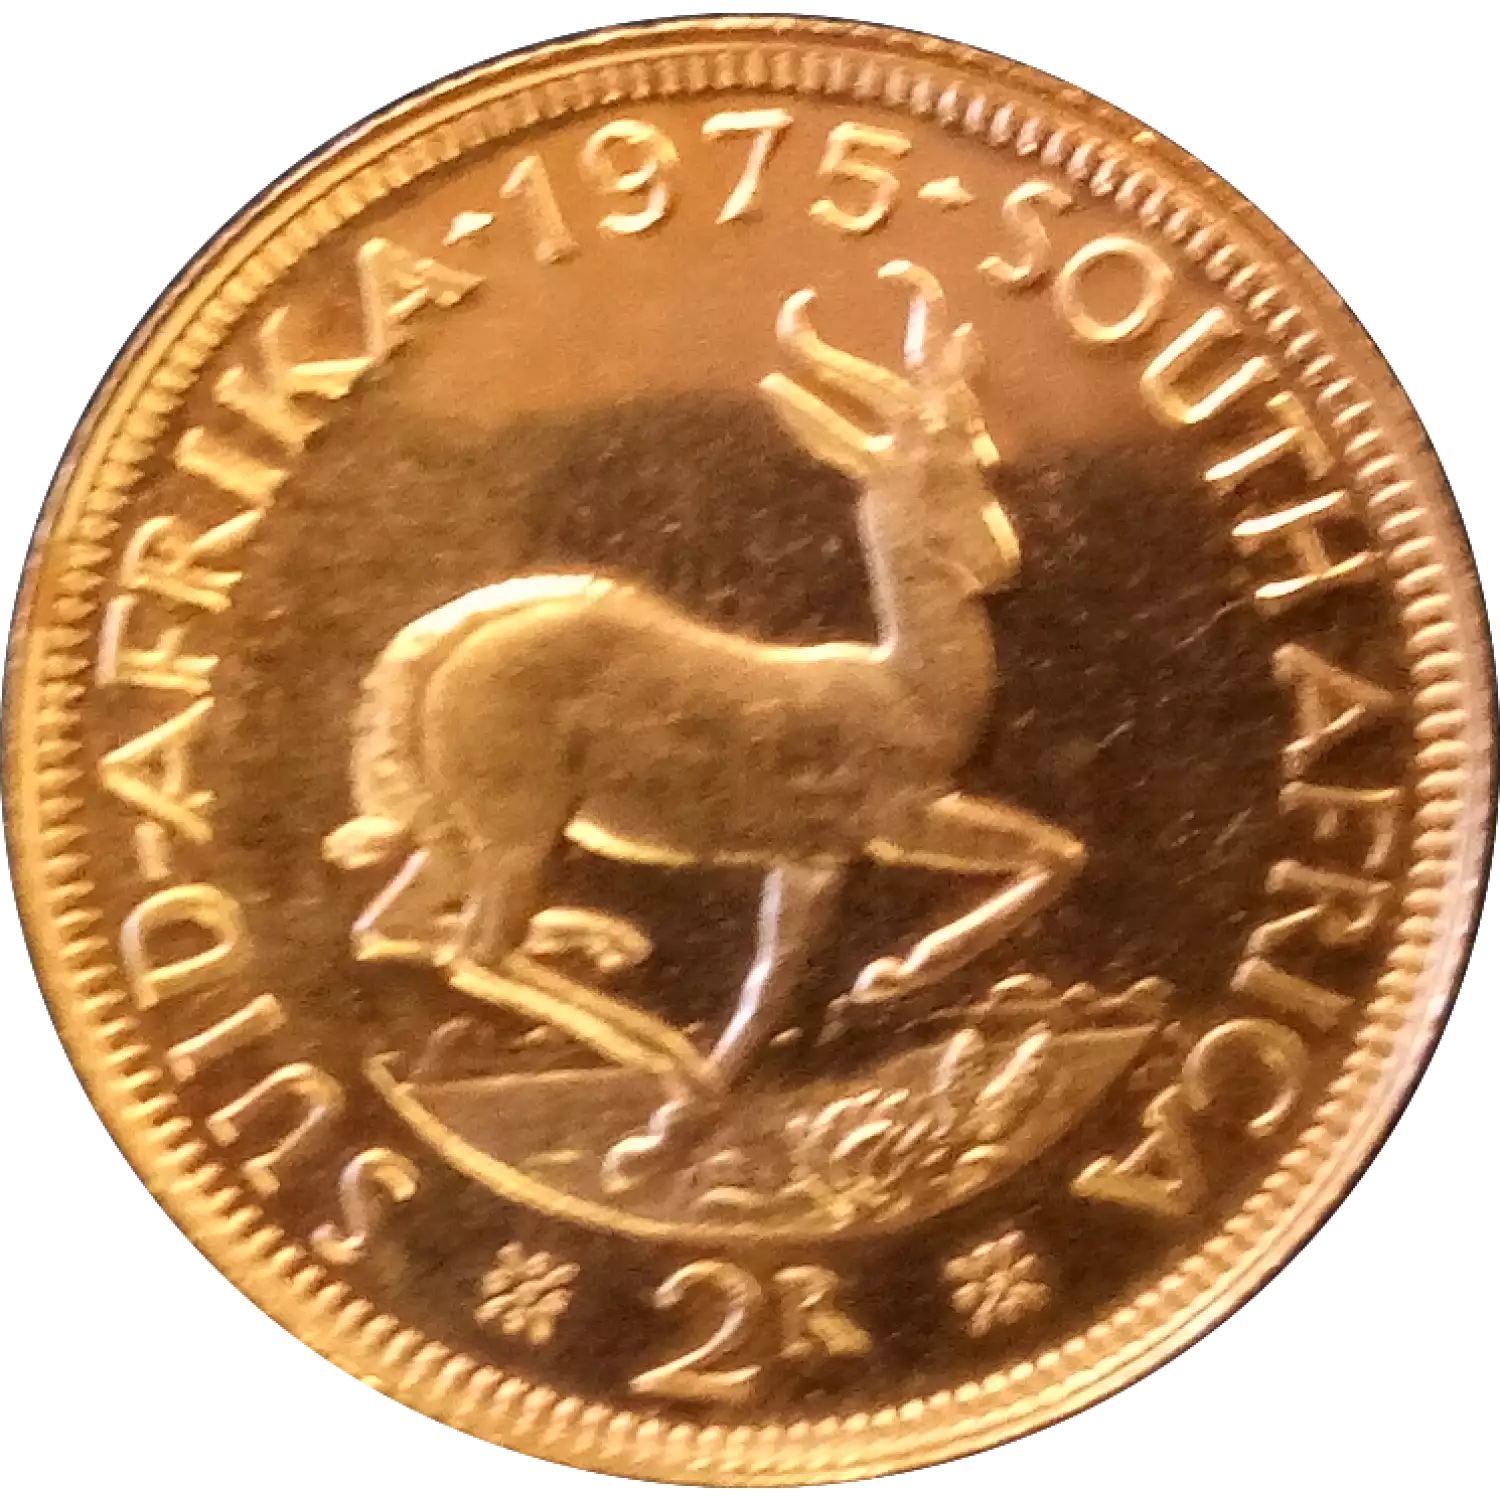 South Africa 2 Rand gold coin (2)